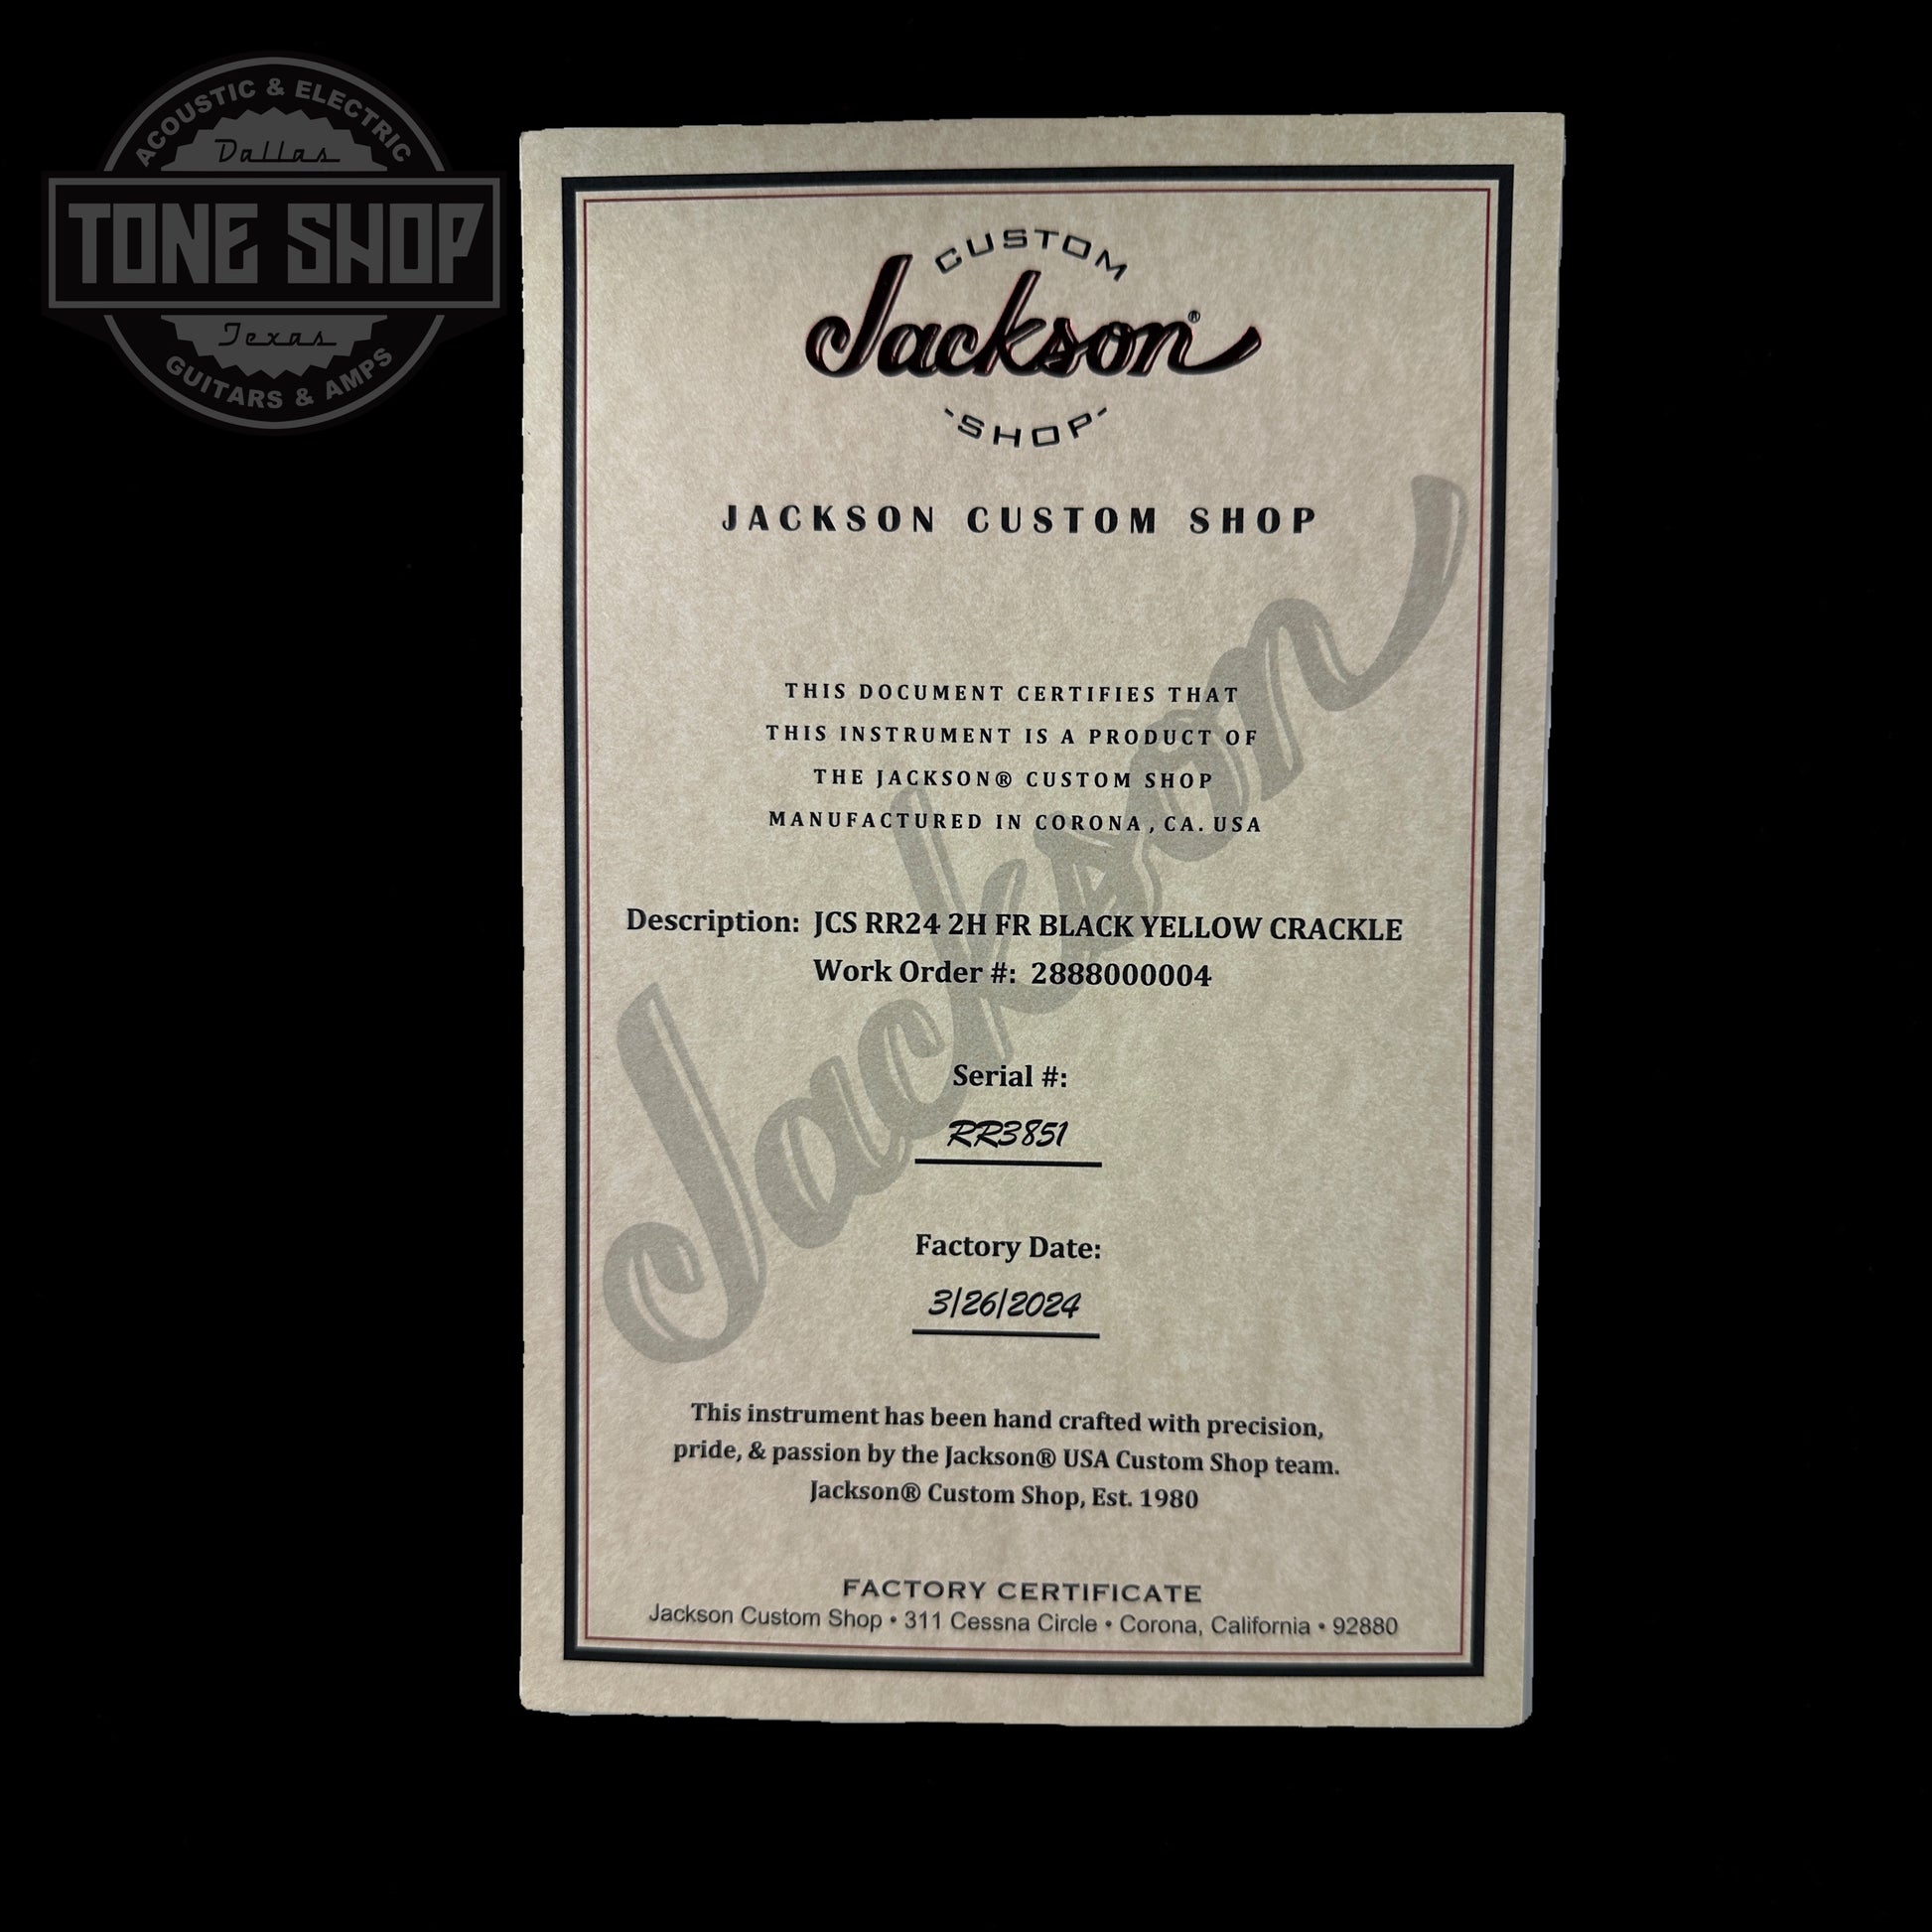 Certificate of authenticity for Jackson Custom Shop Limited Edition Randy Rhoads Nos Black With Yellow Crackle.